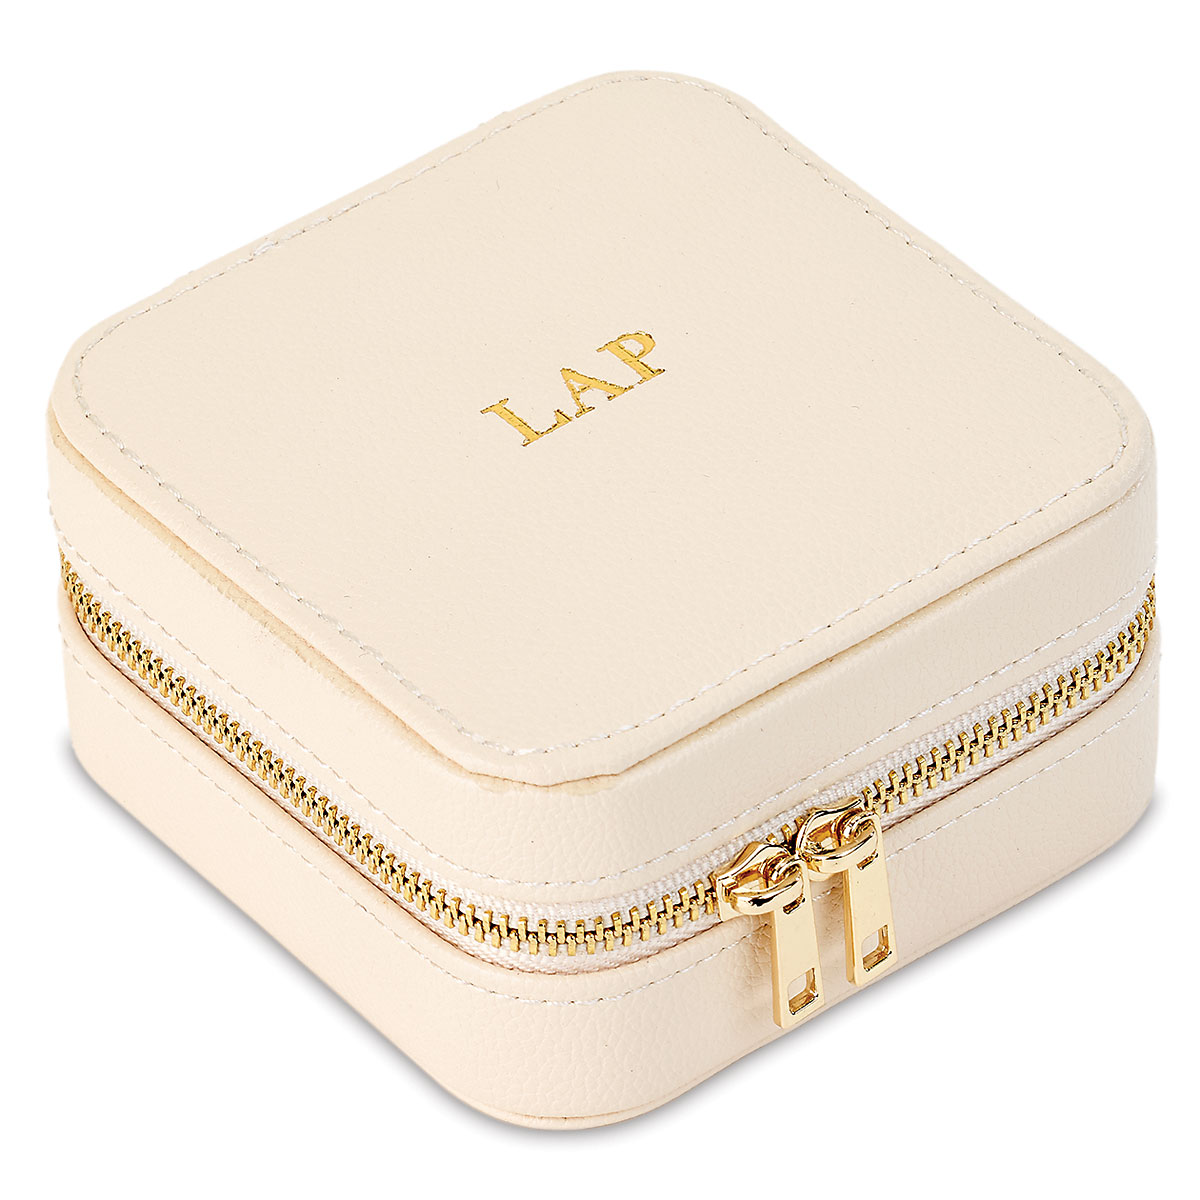 Small travel jewelry case with personalization – Ange jewelry cases